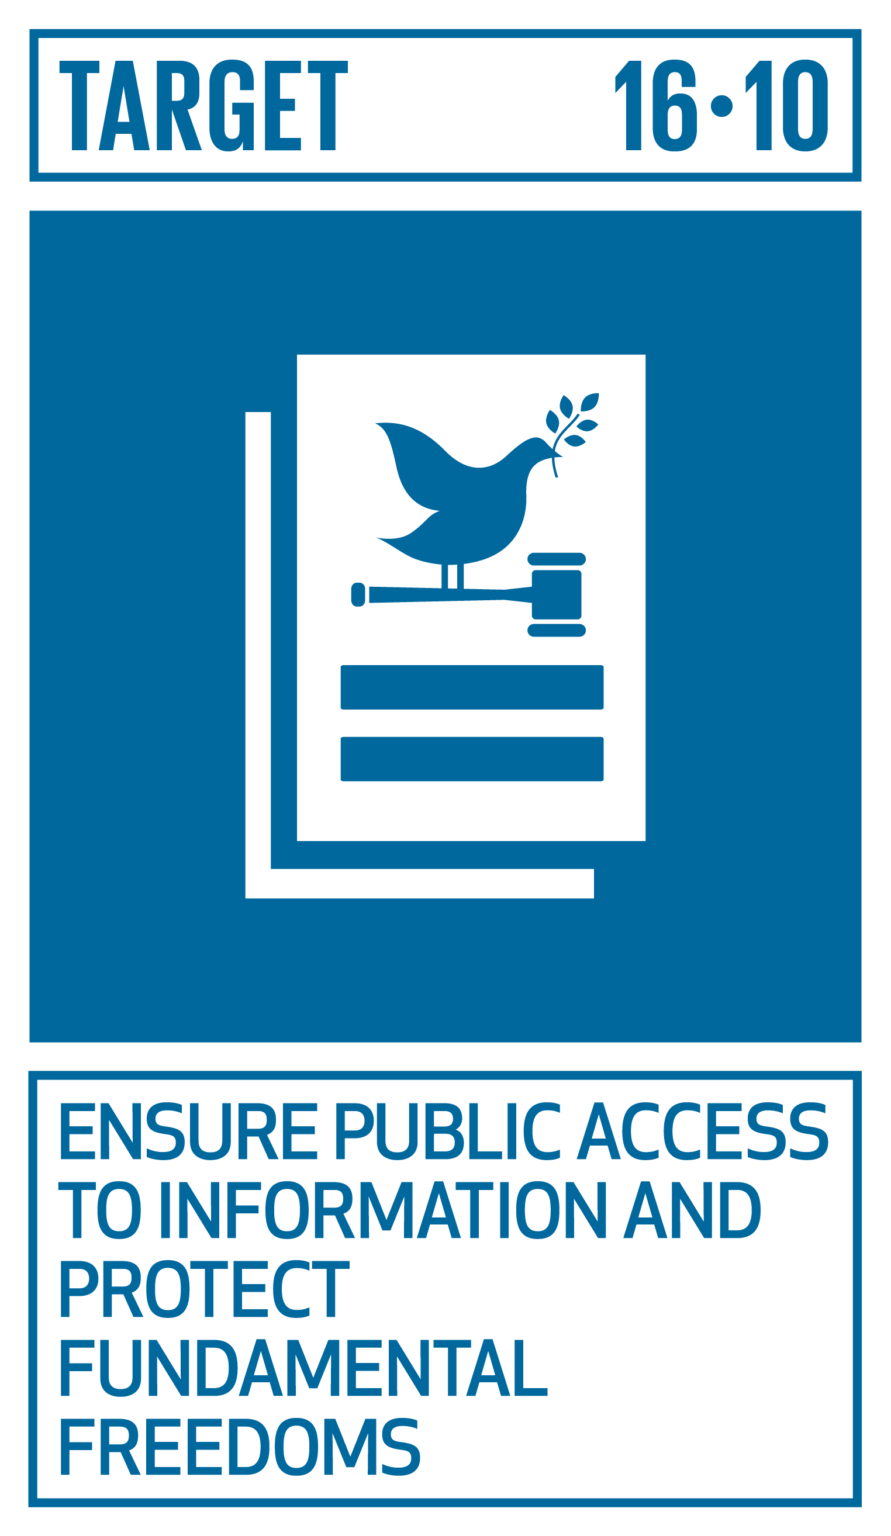 16.10 : 
16.10 Ensure public access to information and protect fundamental freedoms, in accordance with national legislation and international agreements.